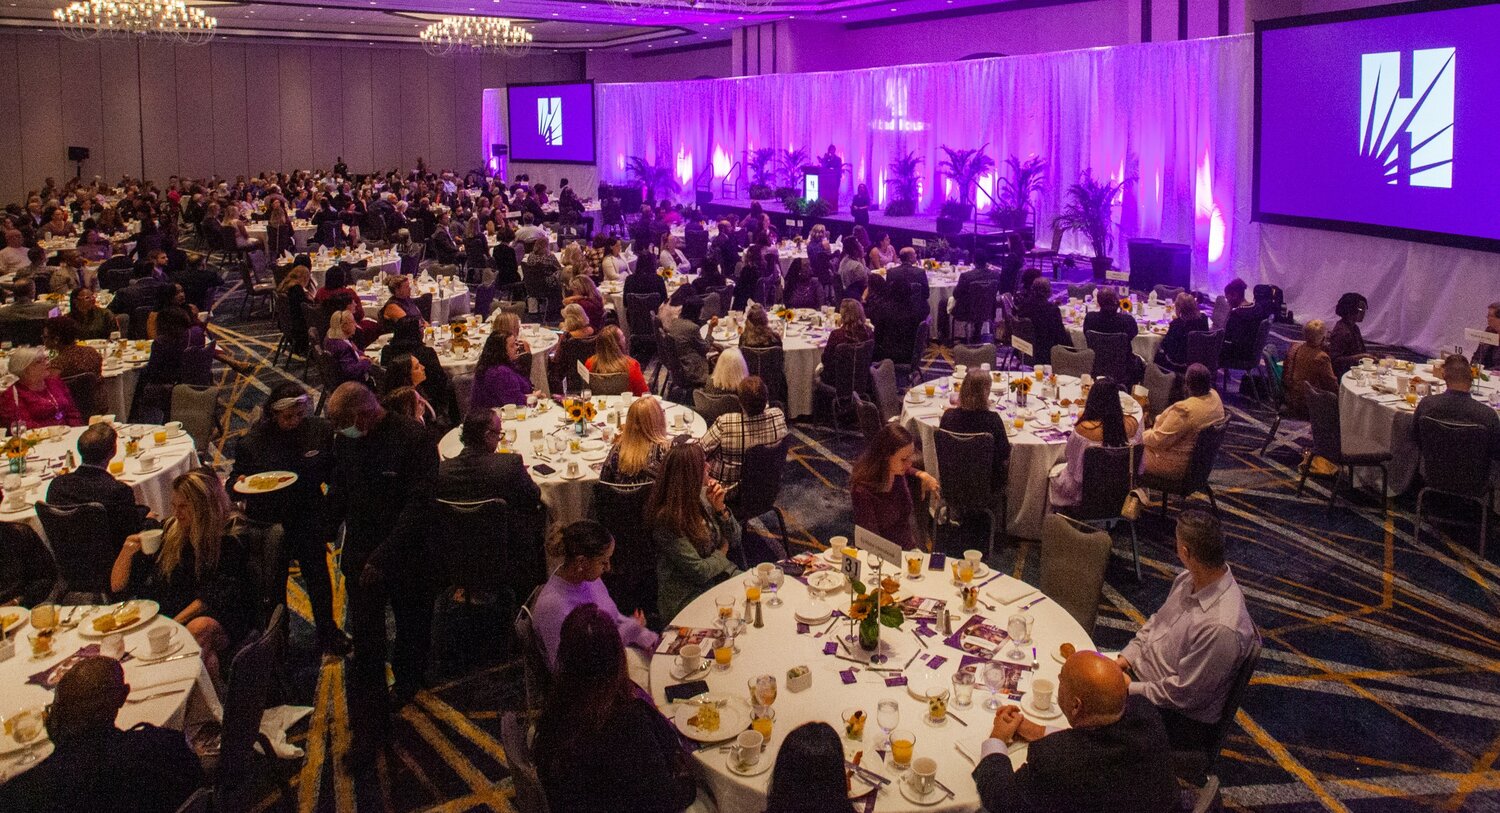 The 29th Annual Barbara Ann Campbell Memorial Breakfast, presented by Bank of America, will help to raise awareness about domestic violence and Hubbard House resources.